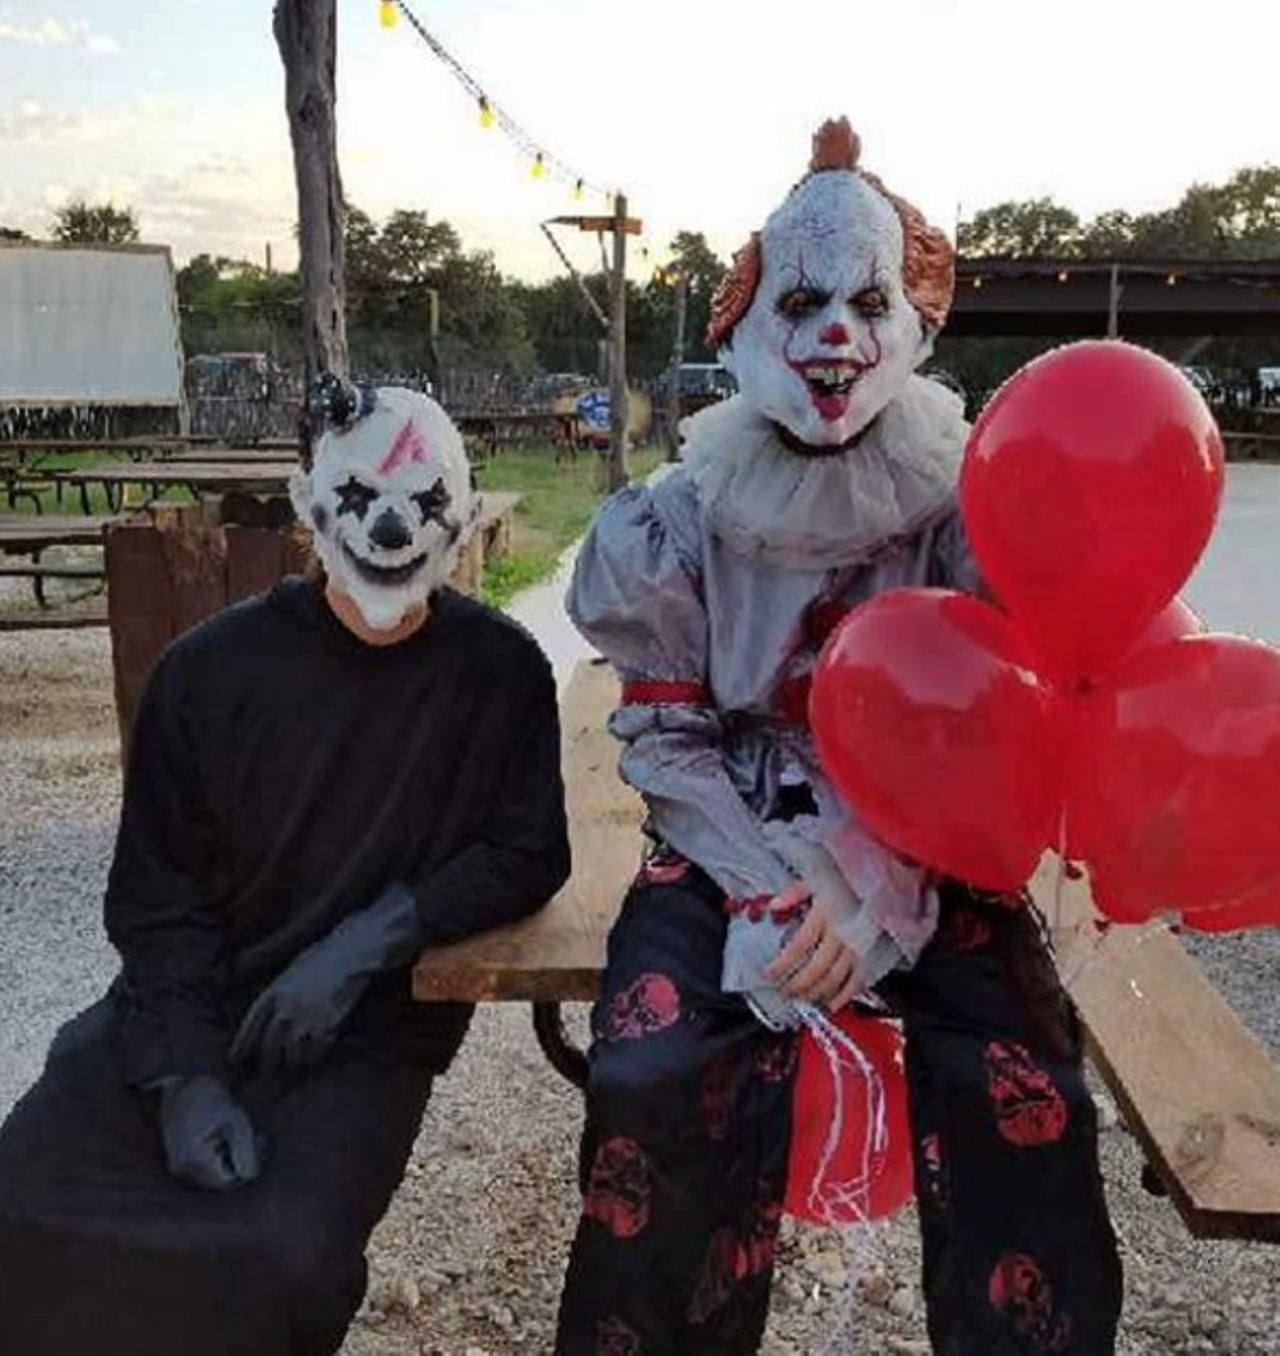 Neal's Lodges Haunted Hayrides
20970 TX-127, Concan, (830) 232-6118, nealslodges.com
Only open two days (October 25 & 26), this event features as many as 75 characters that will scare you as you make your way along the banks of the Frio River. Being outside, this frightful attraction will be all the more creepy.
Photo via Instagram / nealslodges